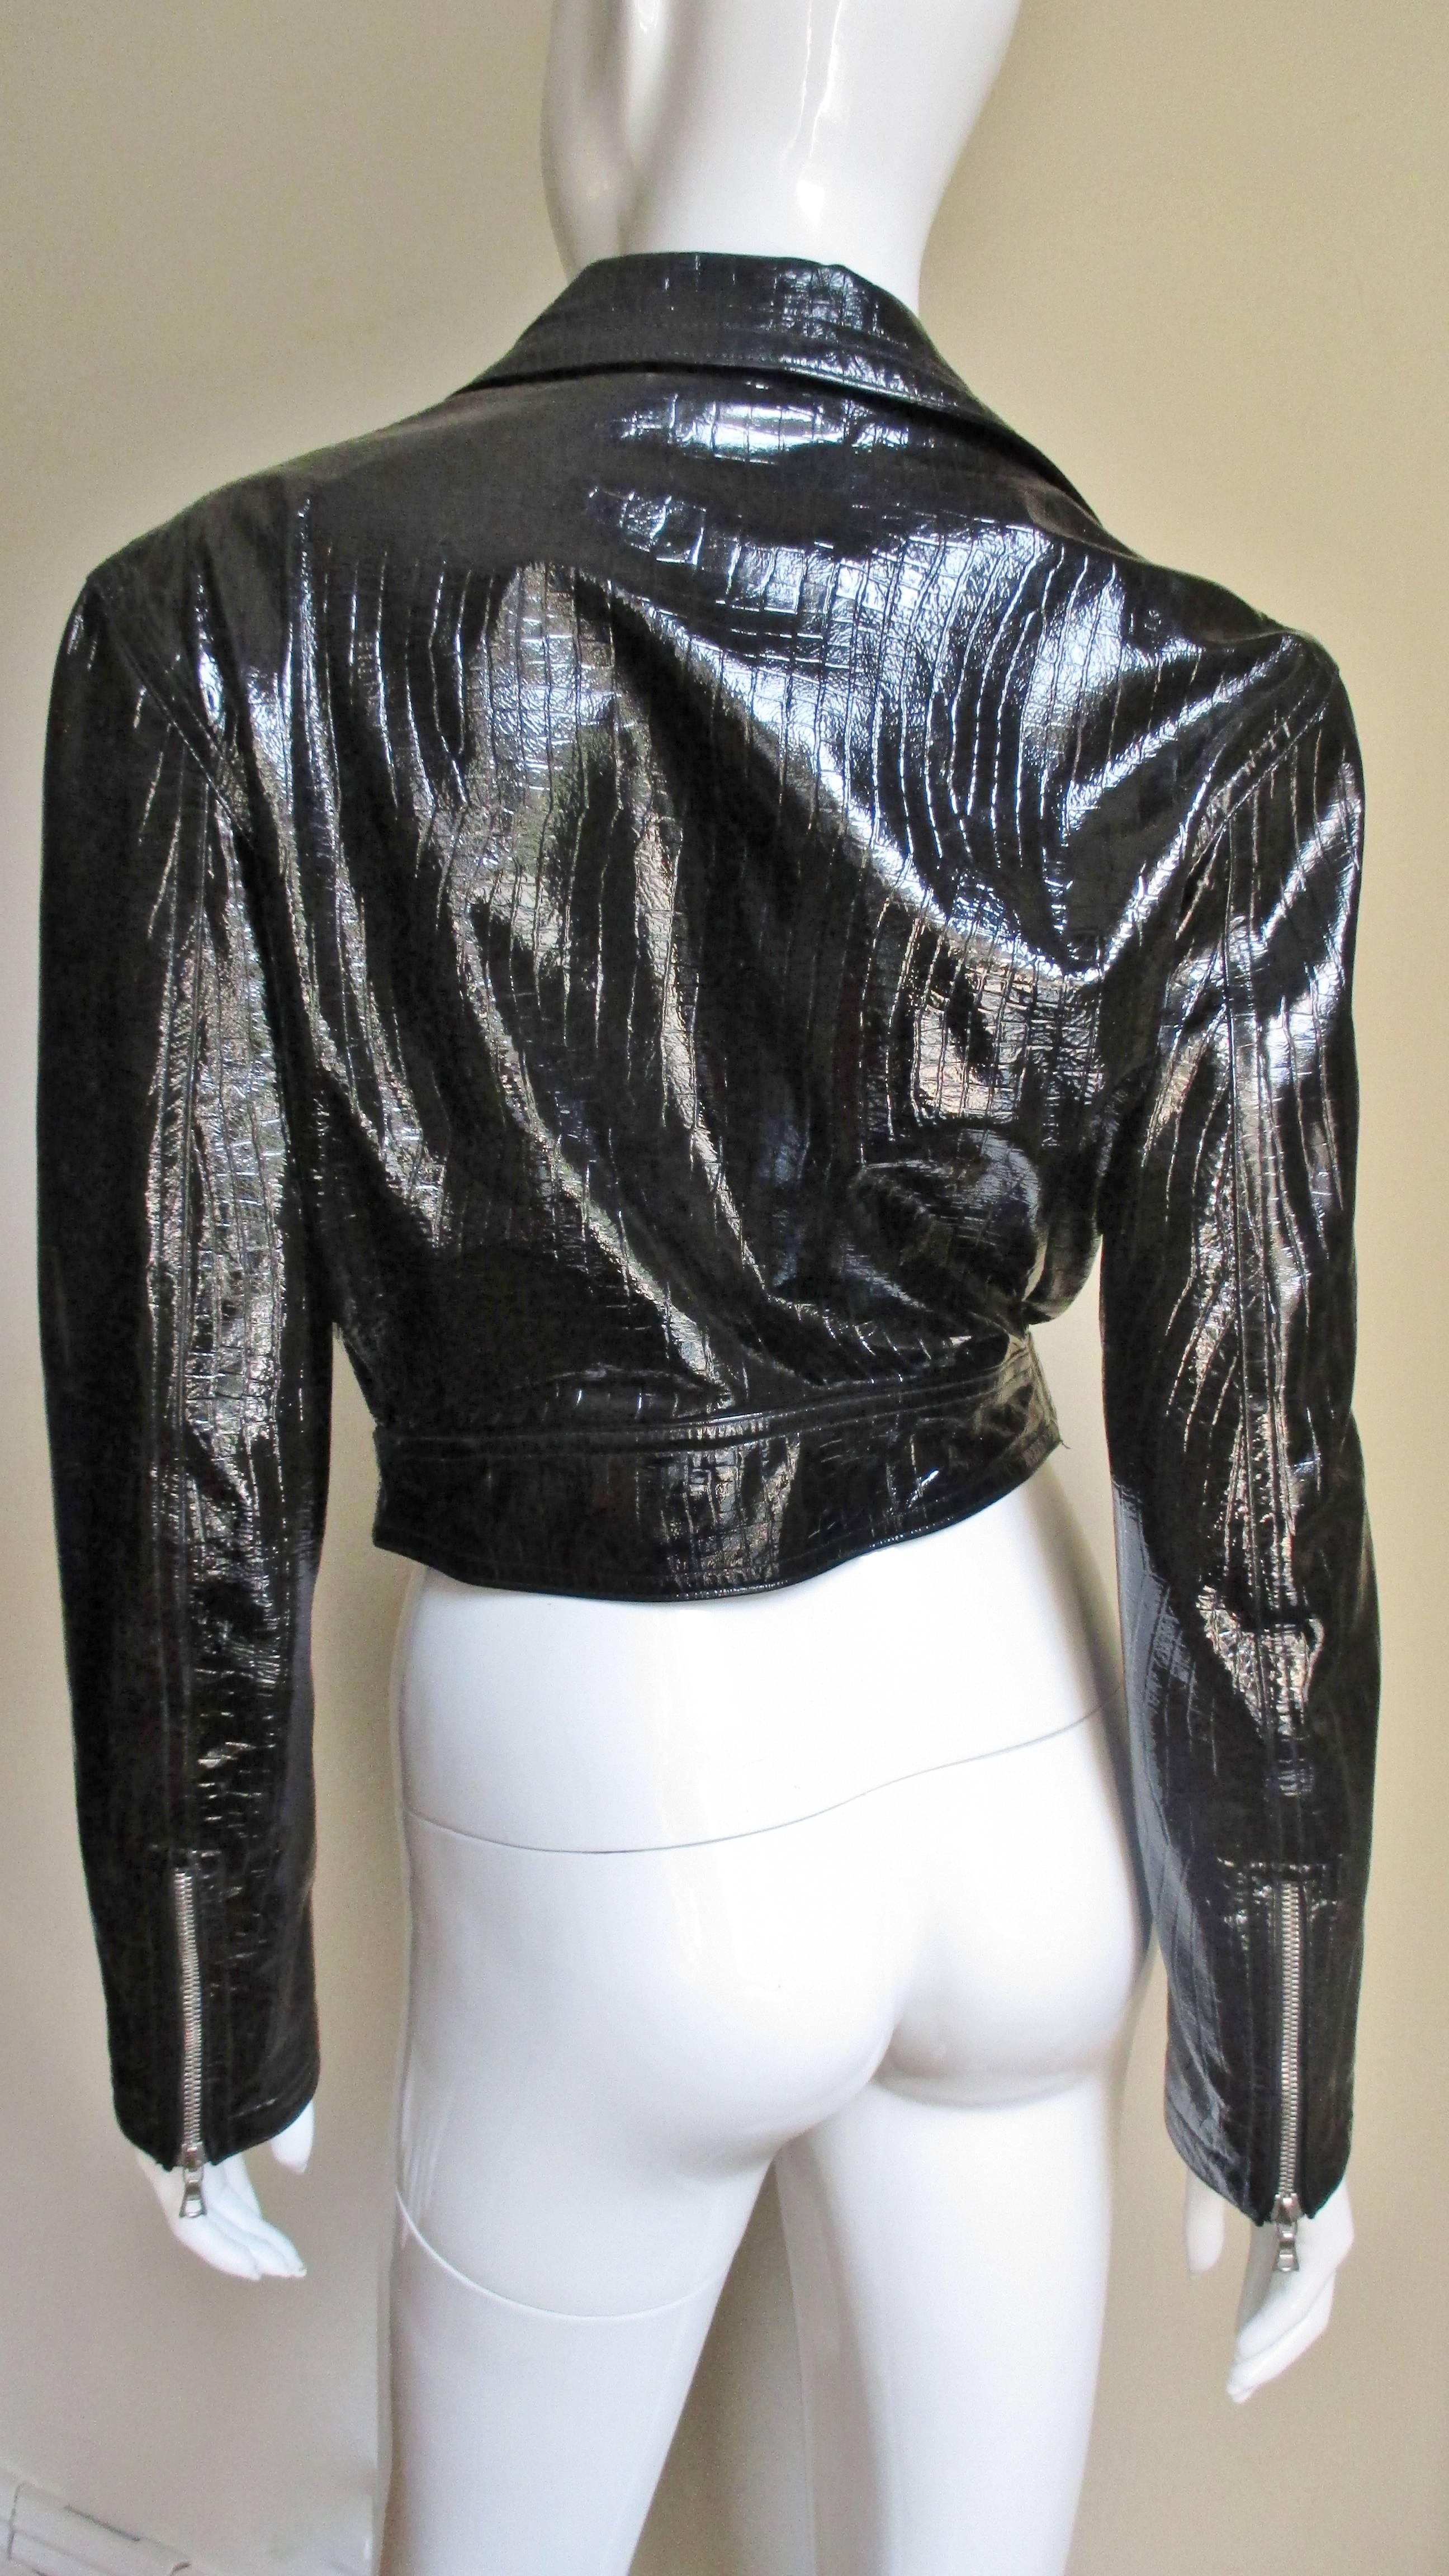 Gianni Versace Leather Motorcycle Jacket and Skirt A/W 1994 For Sale 4